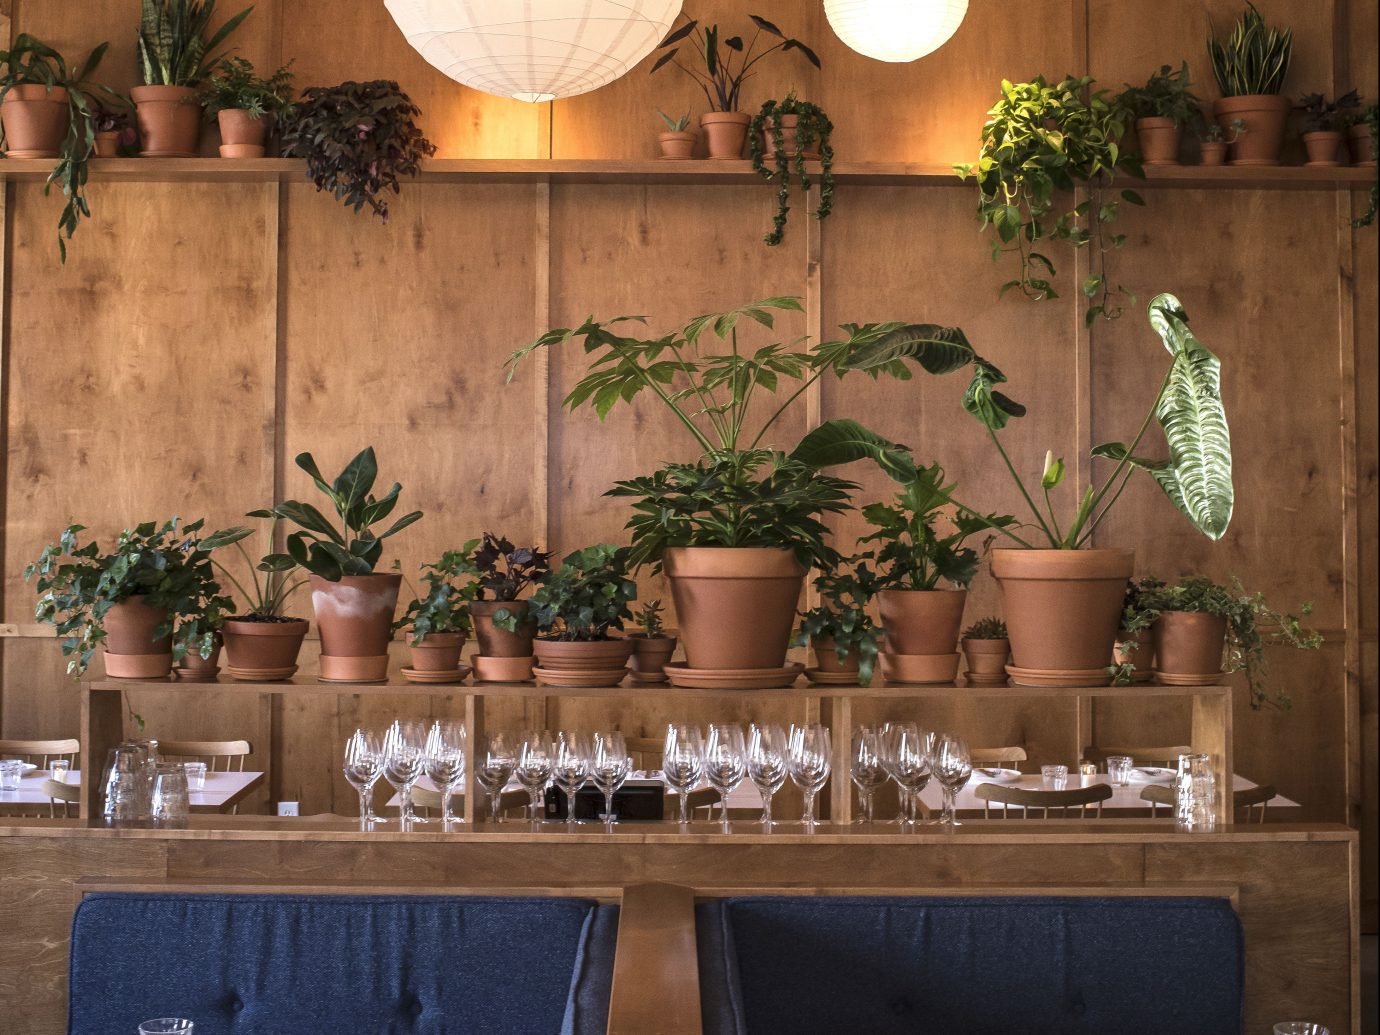 Booths and ledge with potted plants and glassware